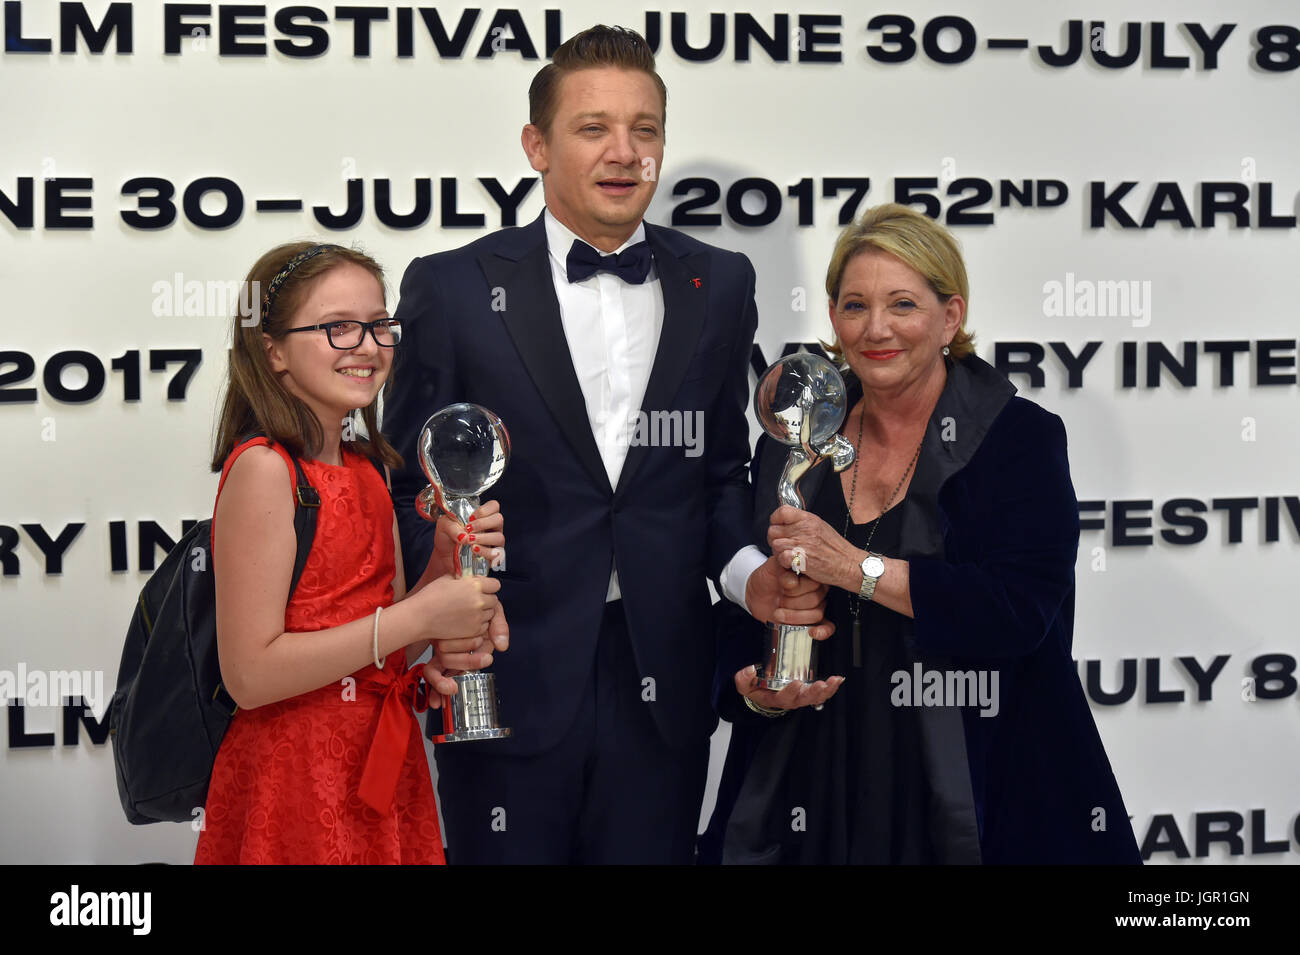 Karlovy Vary, Czech Republic. 08th July, 2017. U.S. actor Jeremy Renner (centre) won Festival President's Award for a major contribution to film development at the closing ceremony in Karlovy Vary, Czech Republic, July 8, 2017. Renner is known for his role of the fictional superhero Hawkeye in The Avengers. At right is his mother. At left is daughter of Bosnian filmmaker Alen Drljevic with award. The special prize went to Men Don't Cry by Bosnian Alen Drljevic about veterans of the war in Yugoslavia and their trauma. Credit: Slavomir Kubes/CTK Photo/Alamy Live News Stock Photo